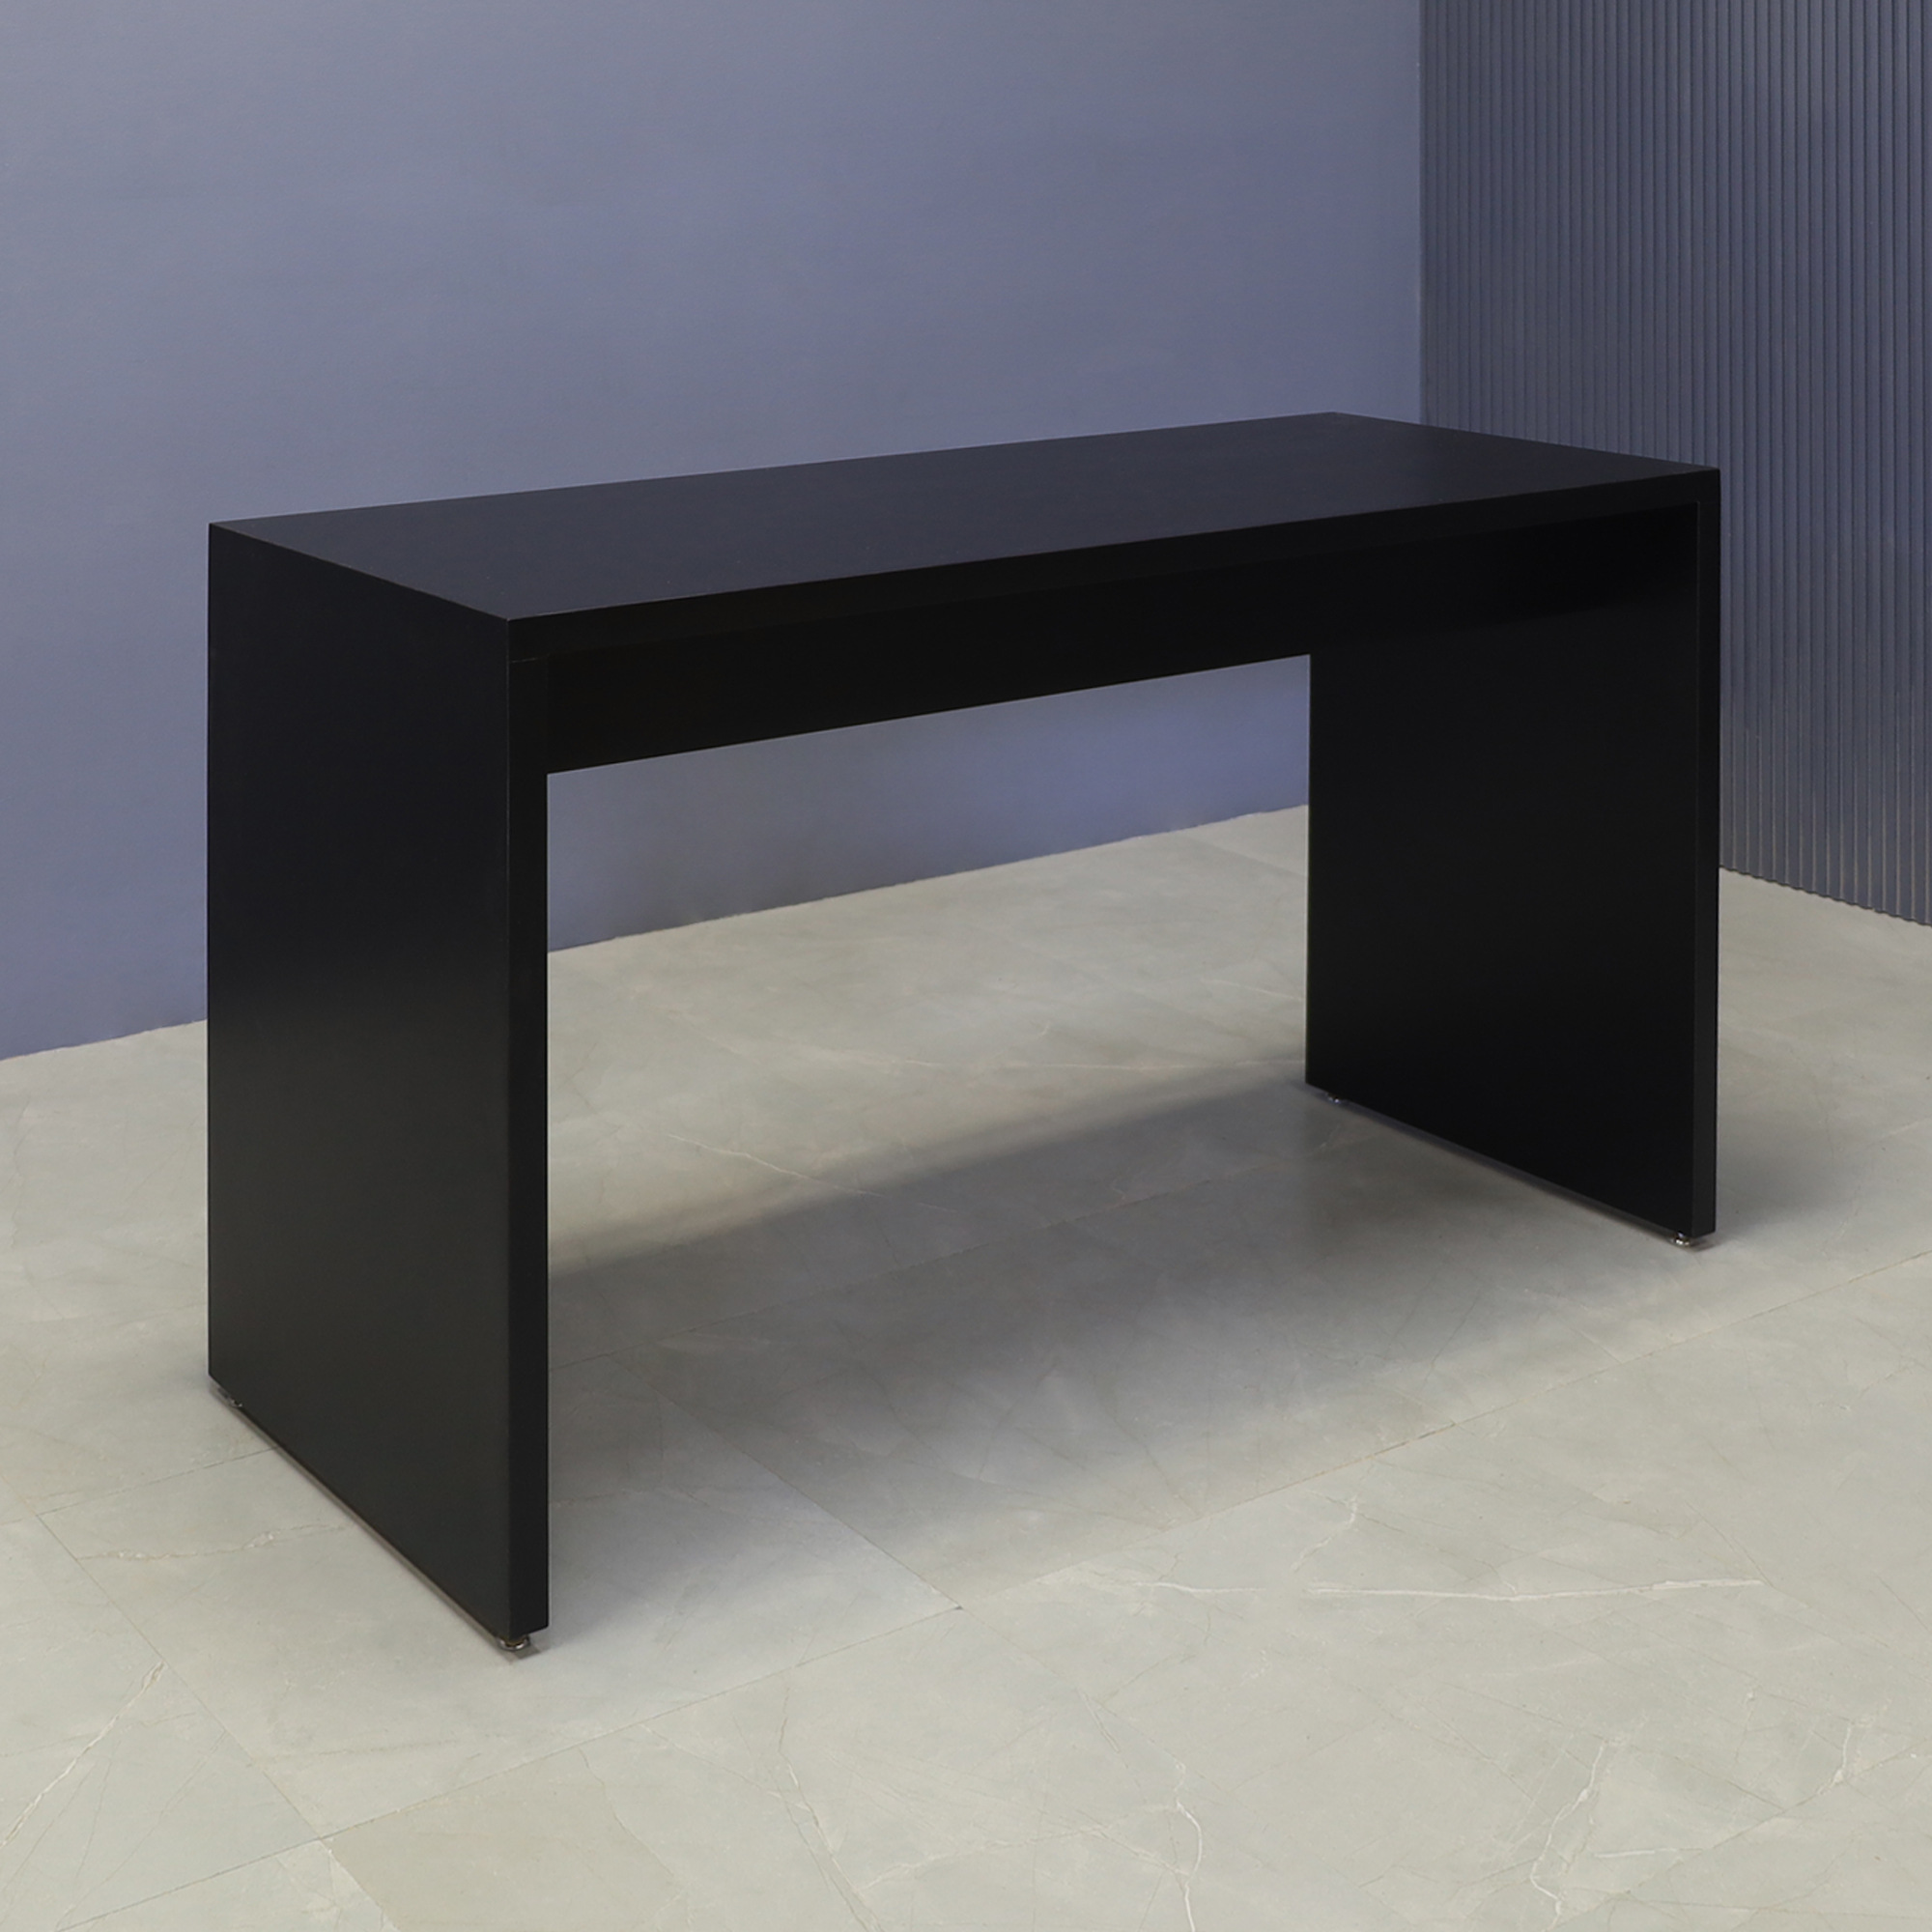 72-inch width x 36-inch height, Ashville Laminate Collaboration Table in black matte laminate, shown here.